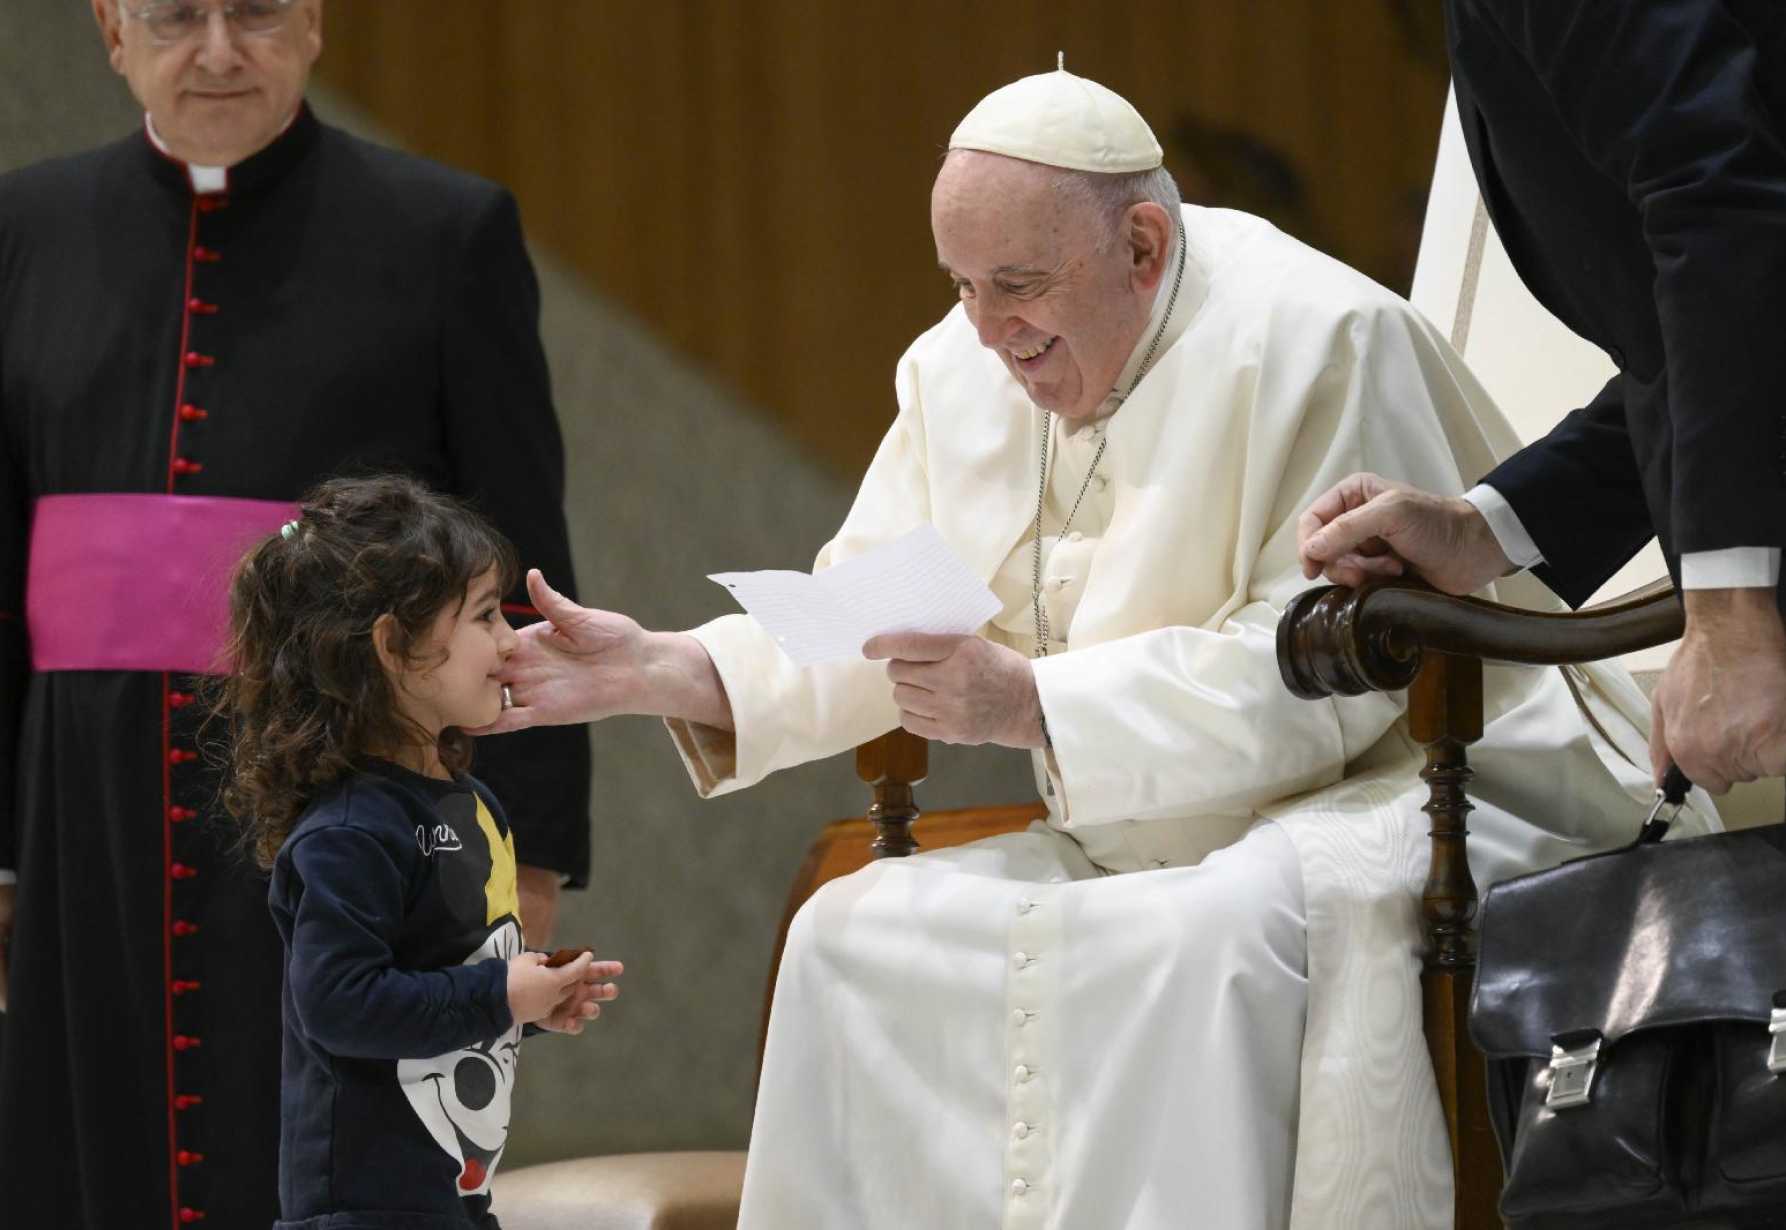 Nothing can diminish the value of any human being, pope says